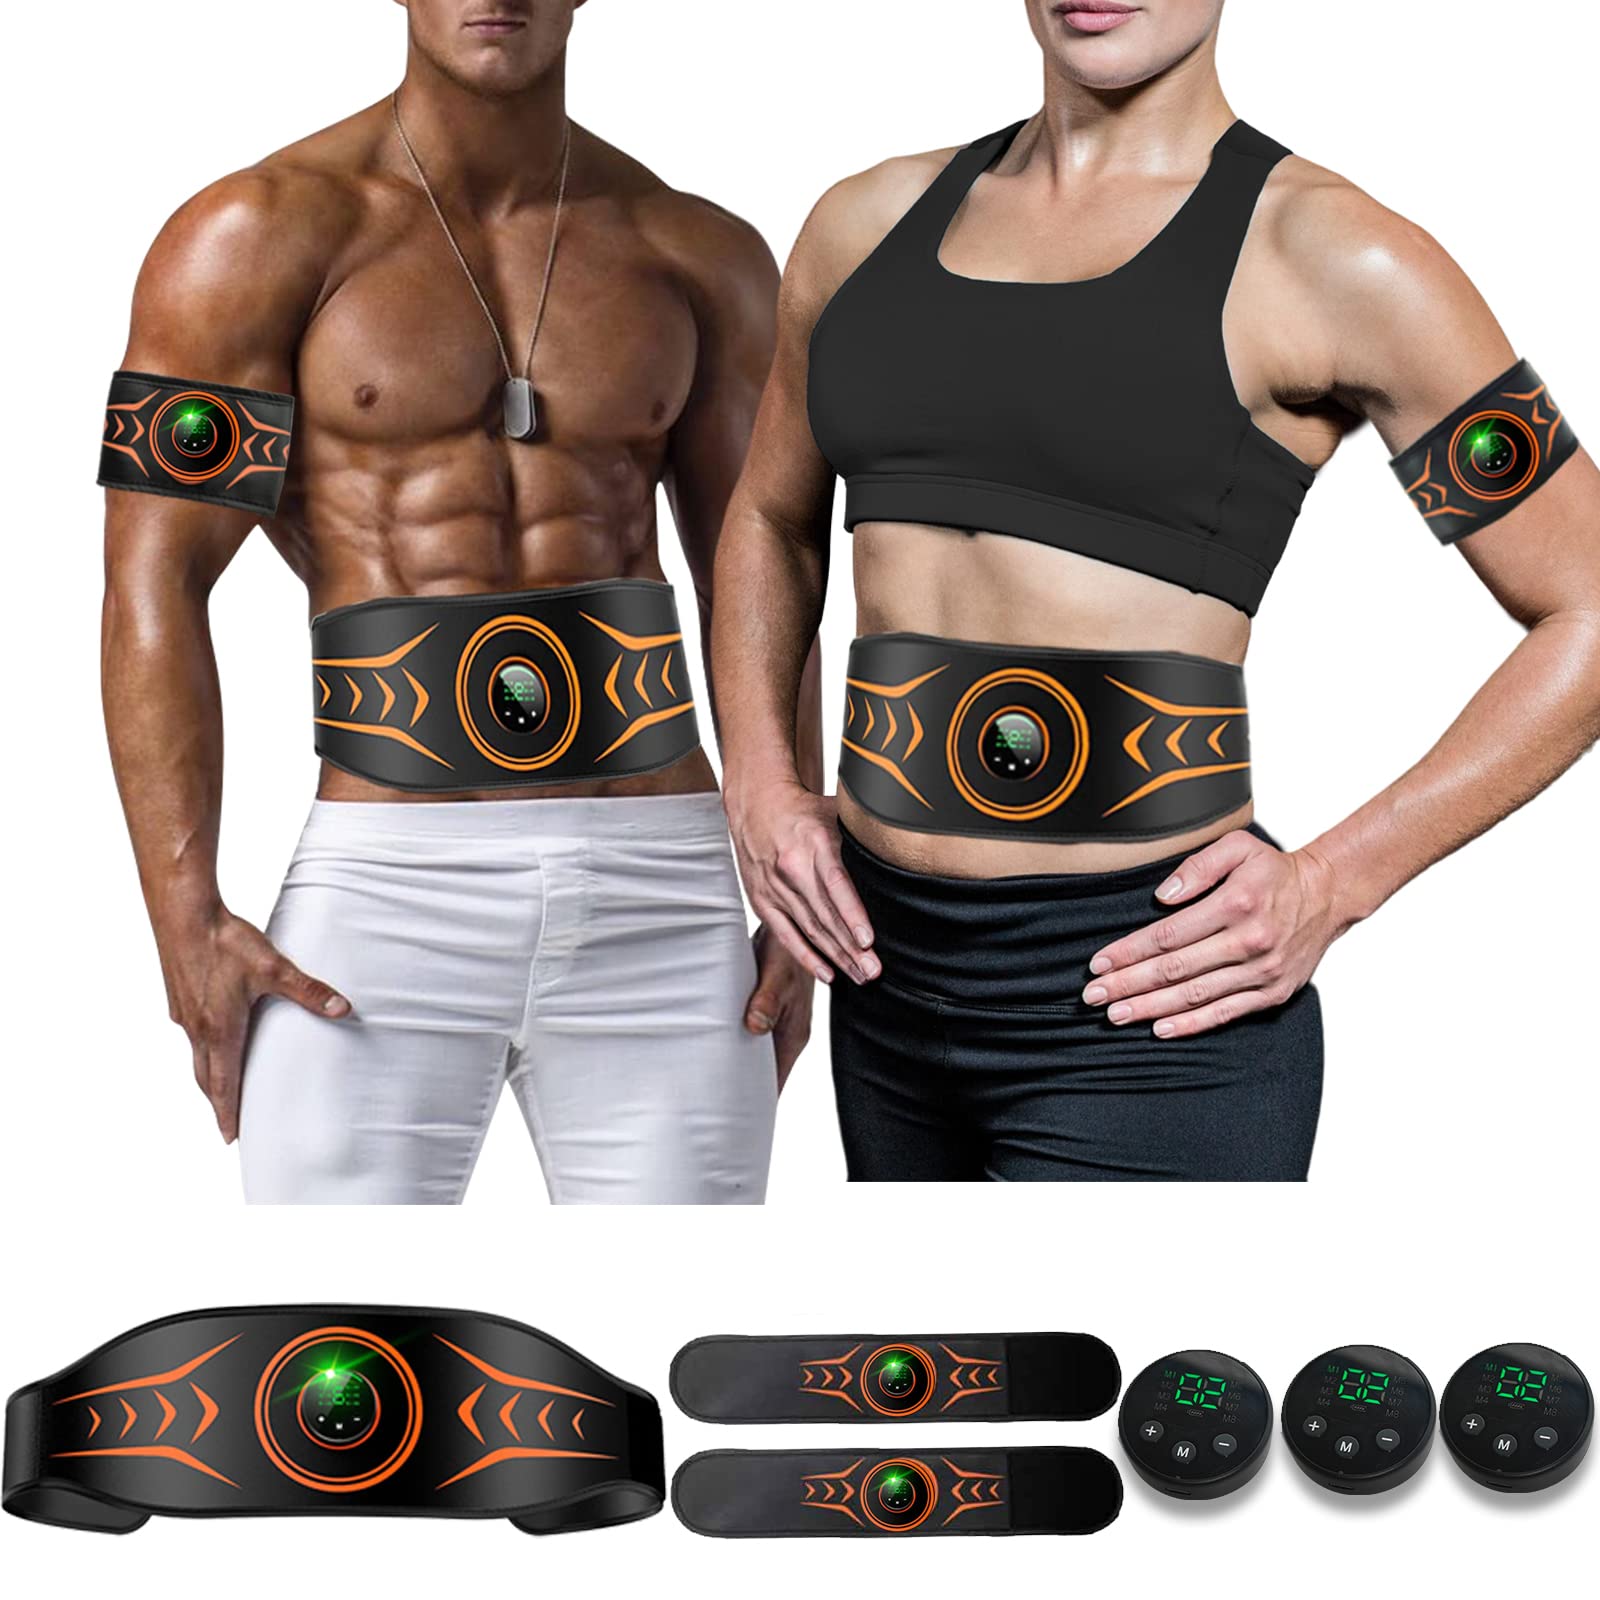 GLGLMA Upgrade Ab Trainer Flex Belt,Abdominal Muscle Toner Machine,Abs  Machine Exercise Equipment for Men Women, 10 Modes 39 Intensity Levels :  : Sporting Goods